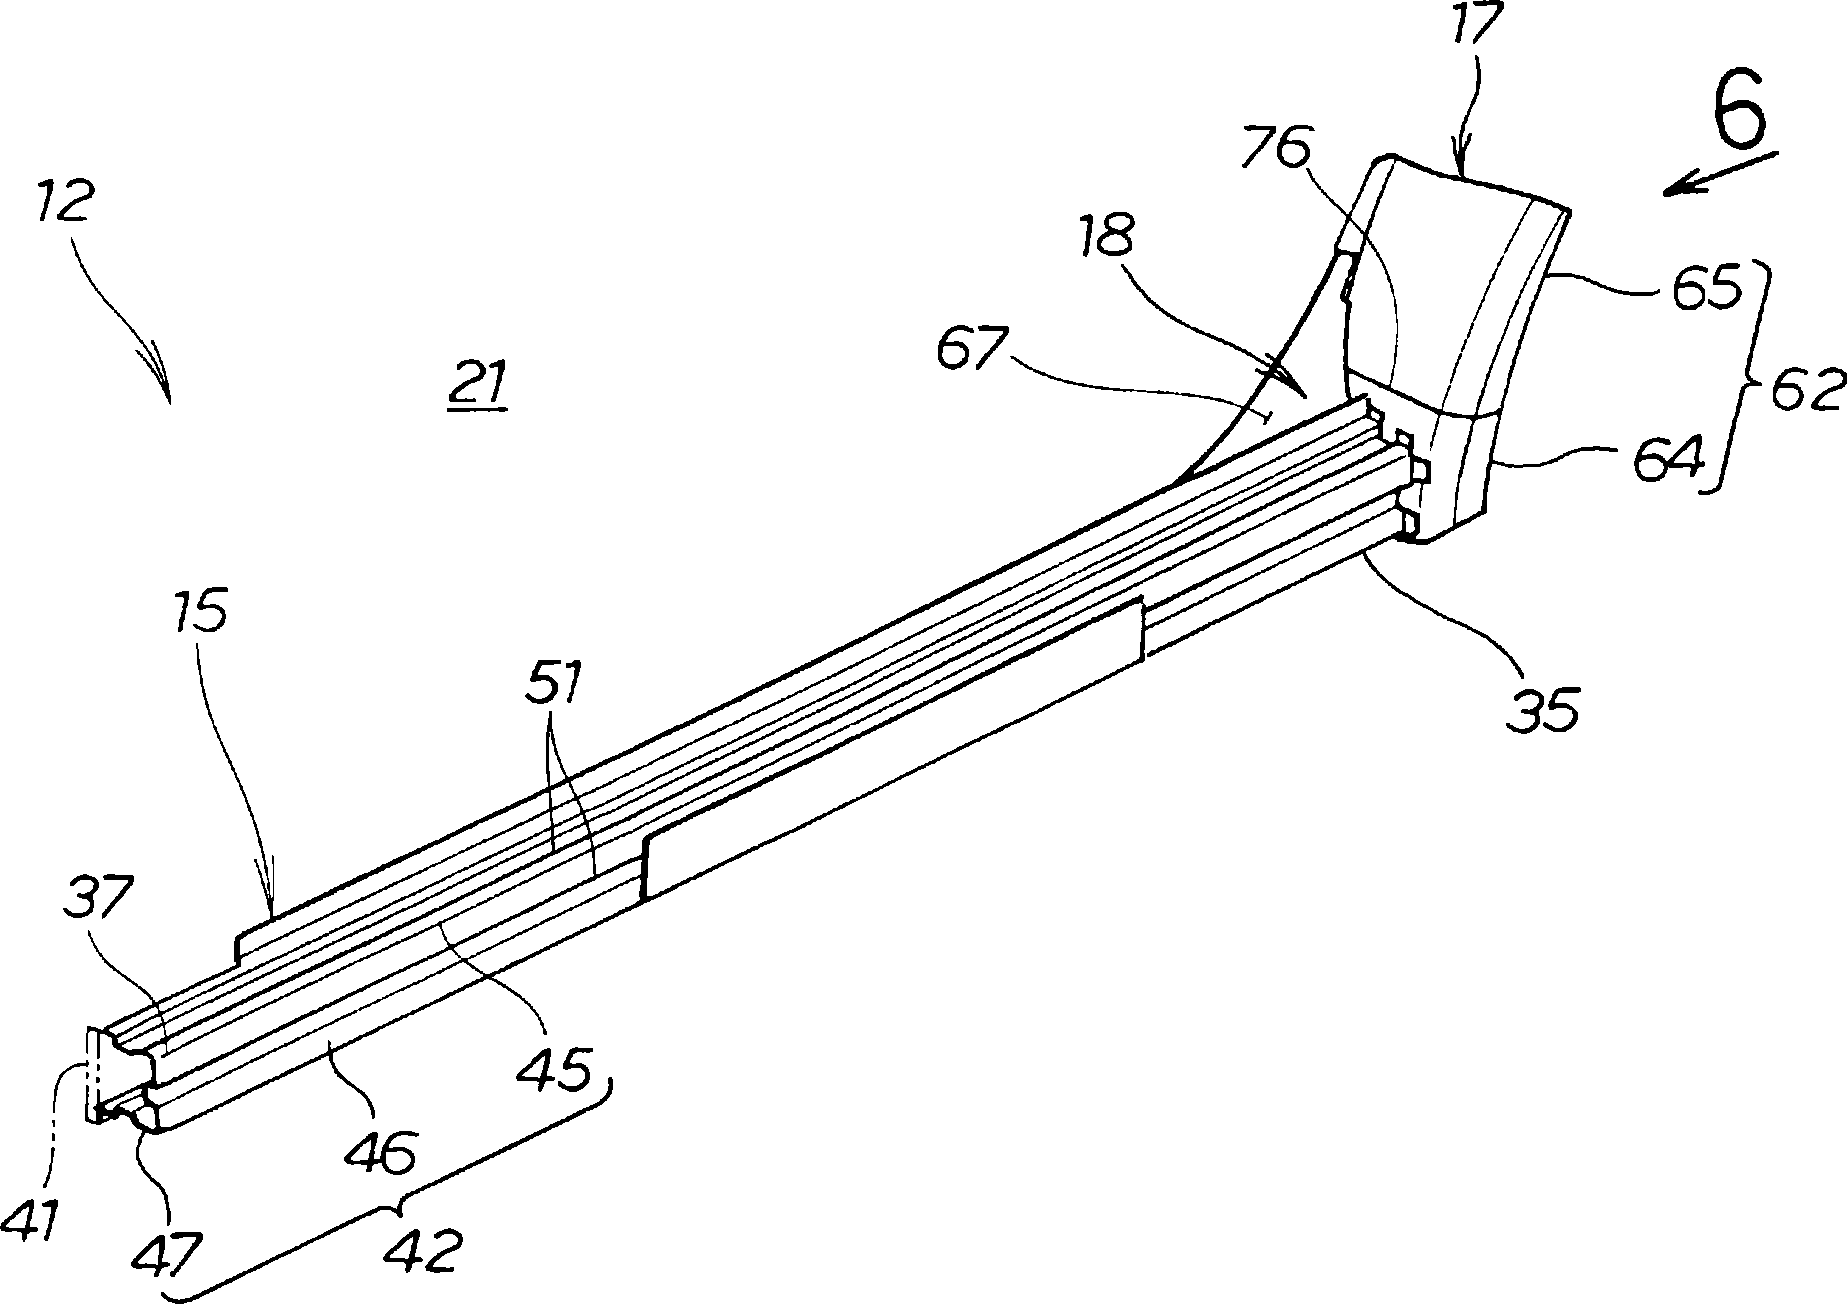 Structure for side section of vehicle body